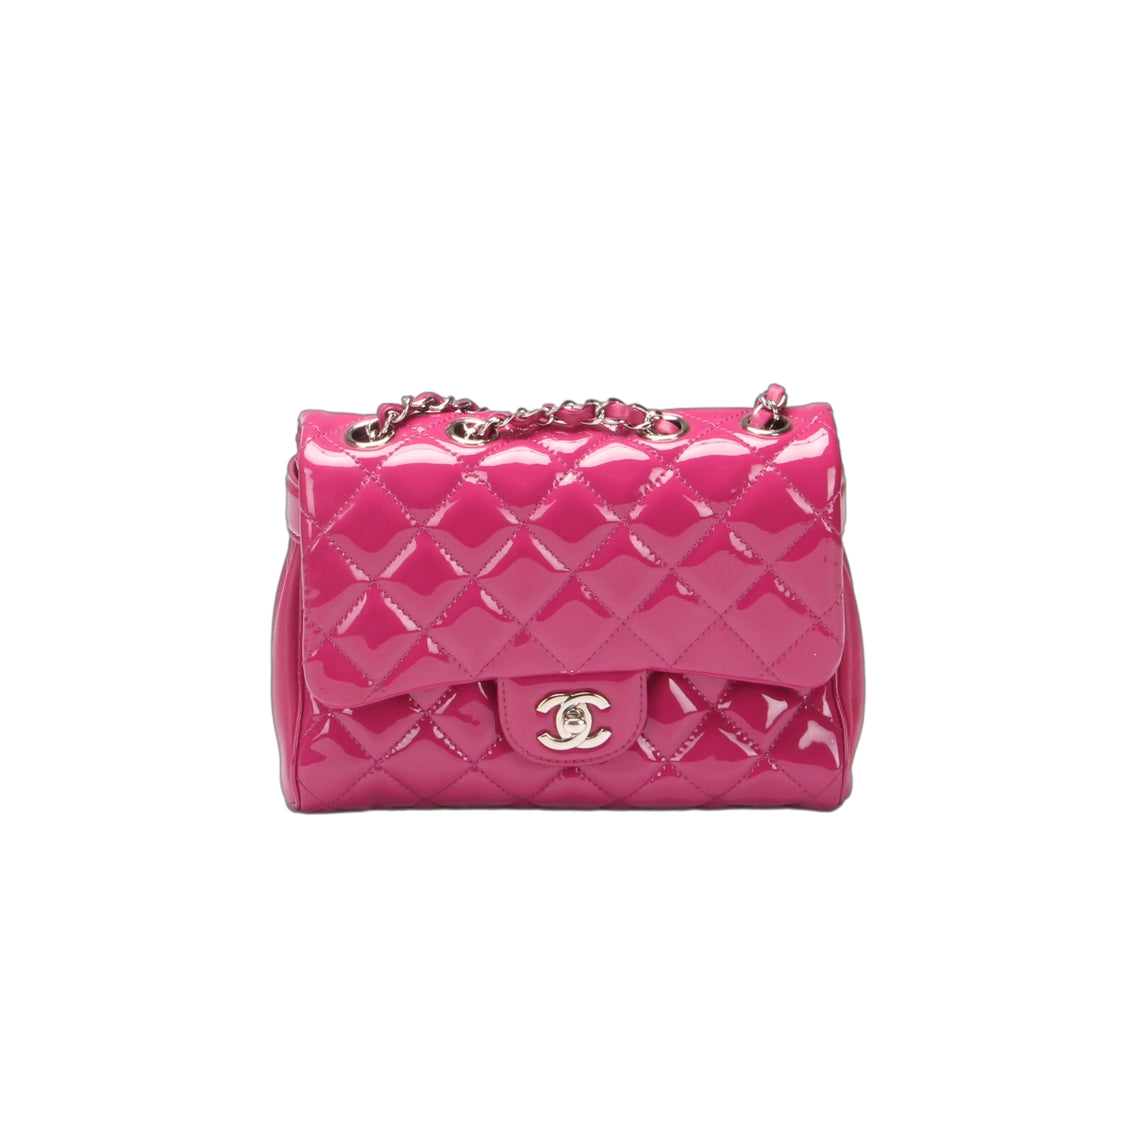 Patent Leather CC Timeless Flap Bag